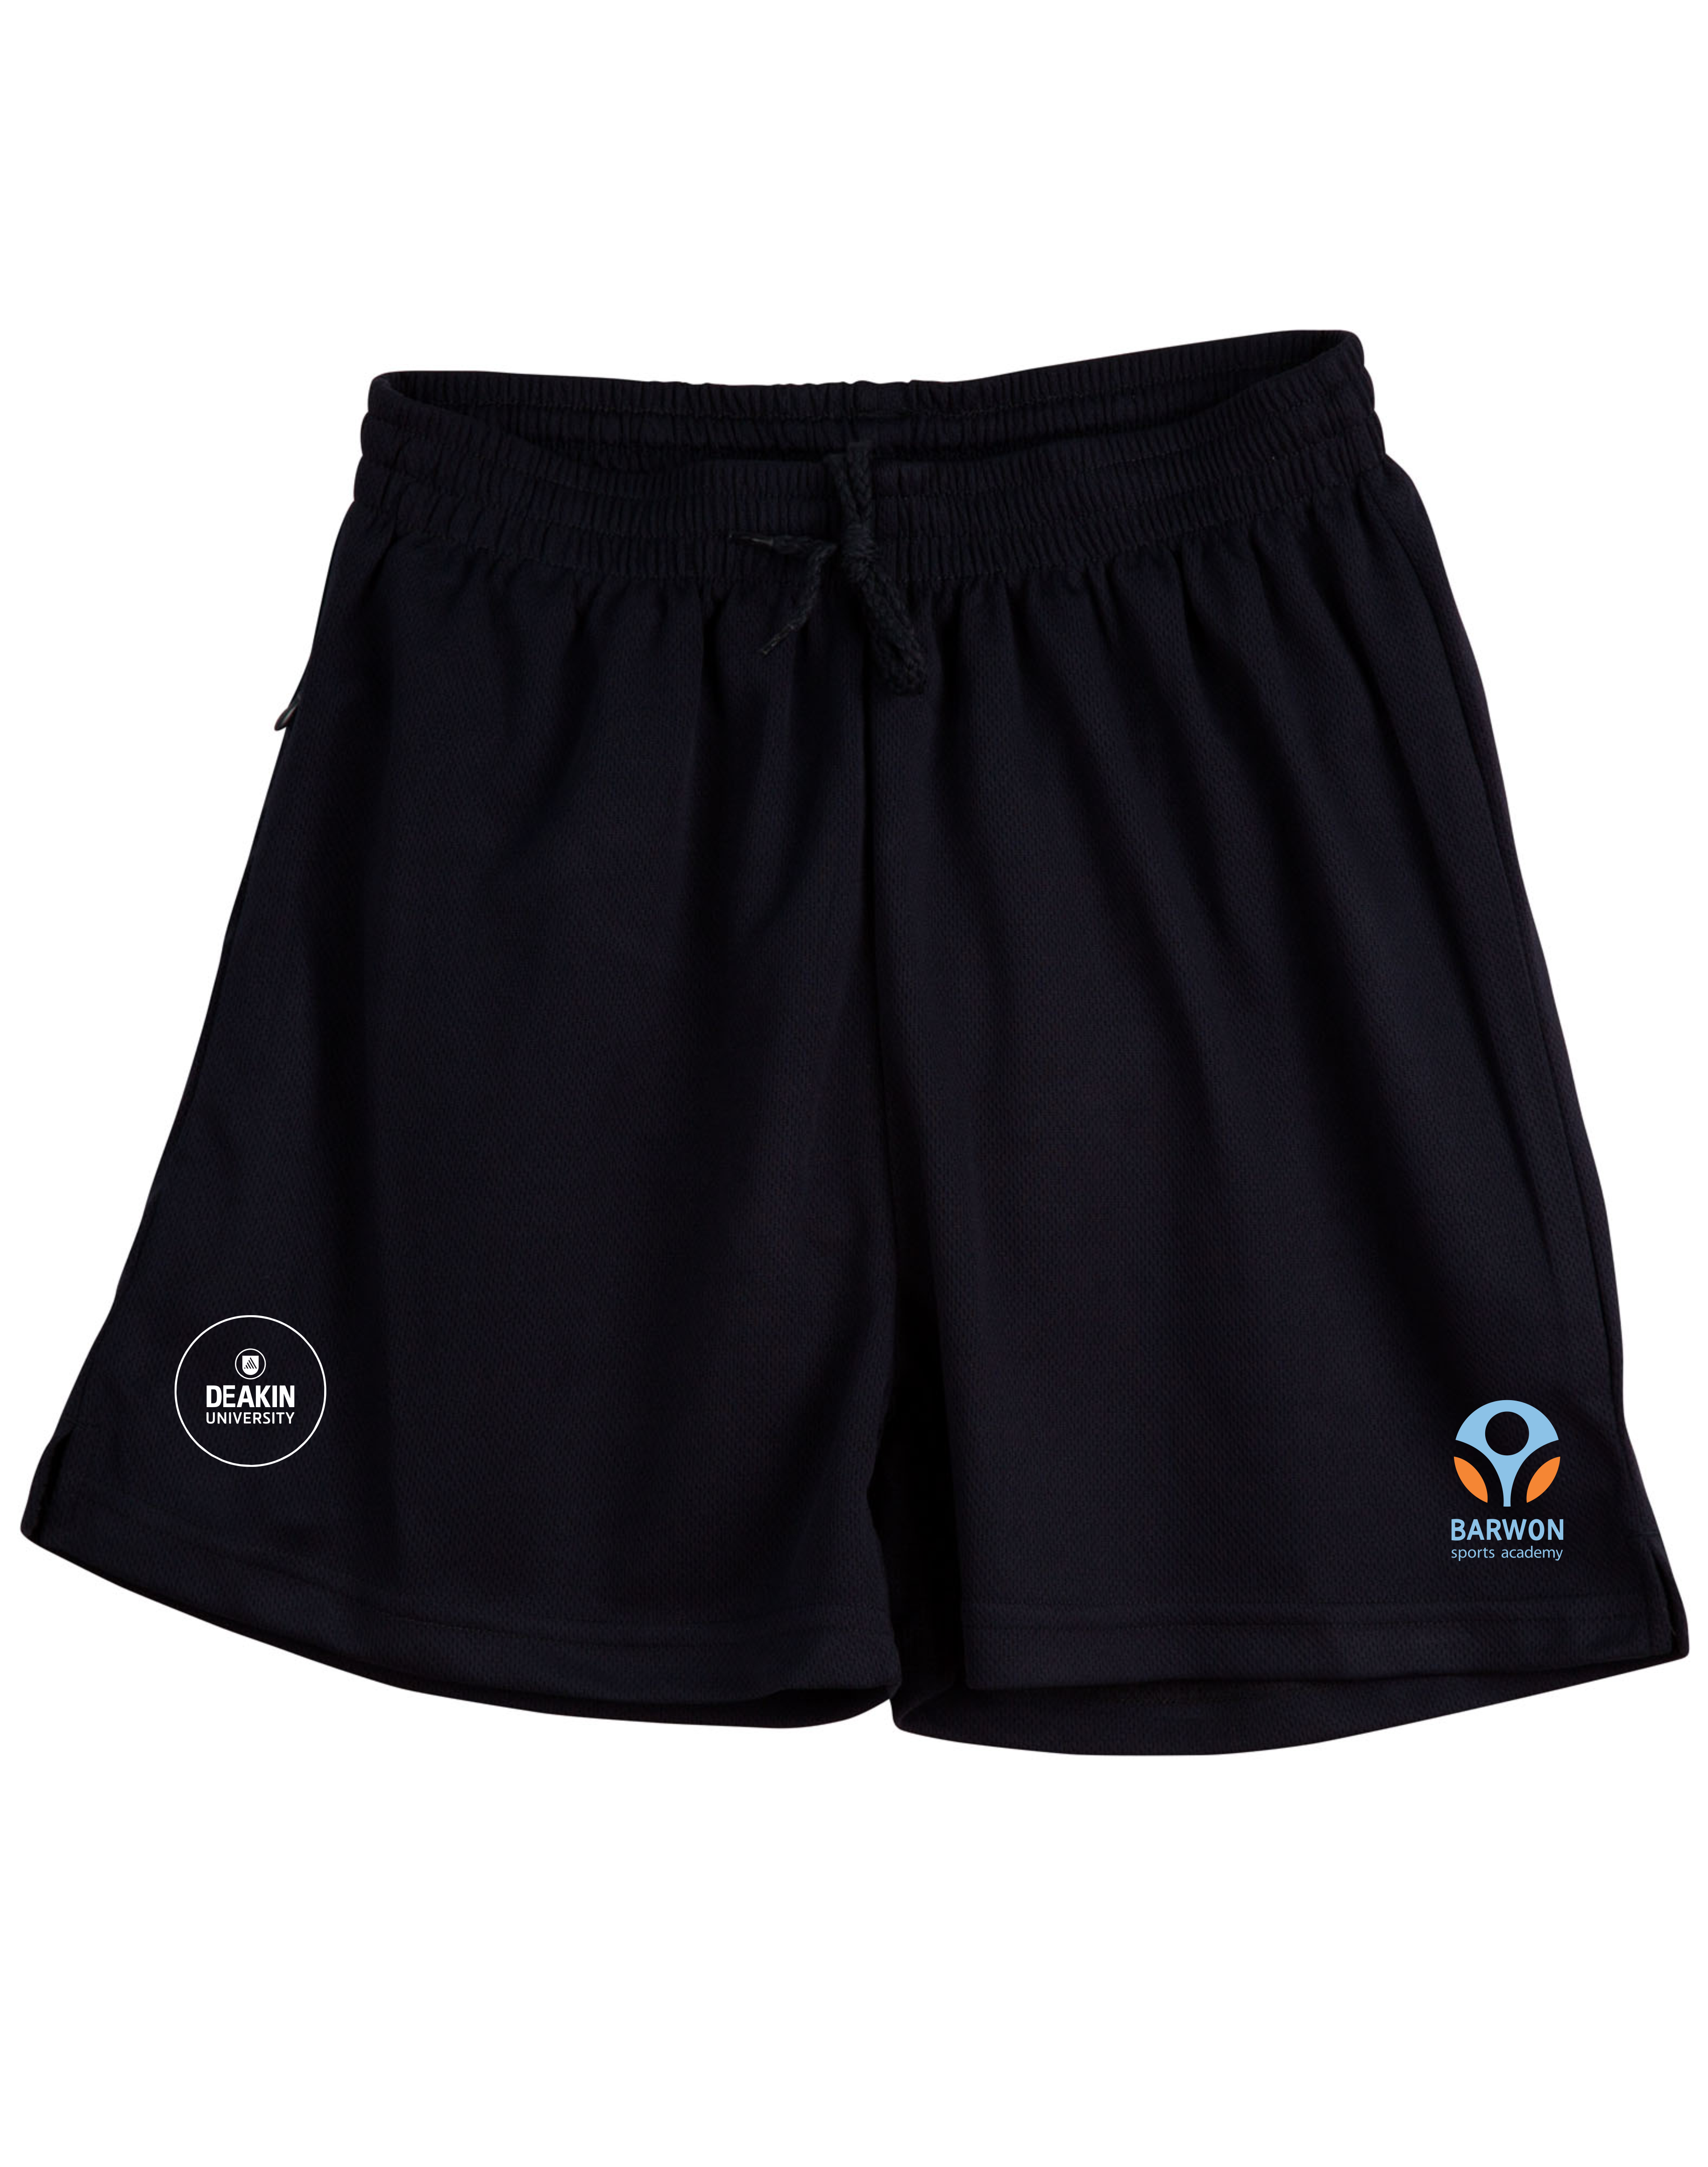 ***Discontinued Academy Ladies Shorts ***RUN OUT SALE***